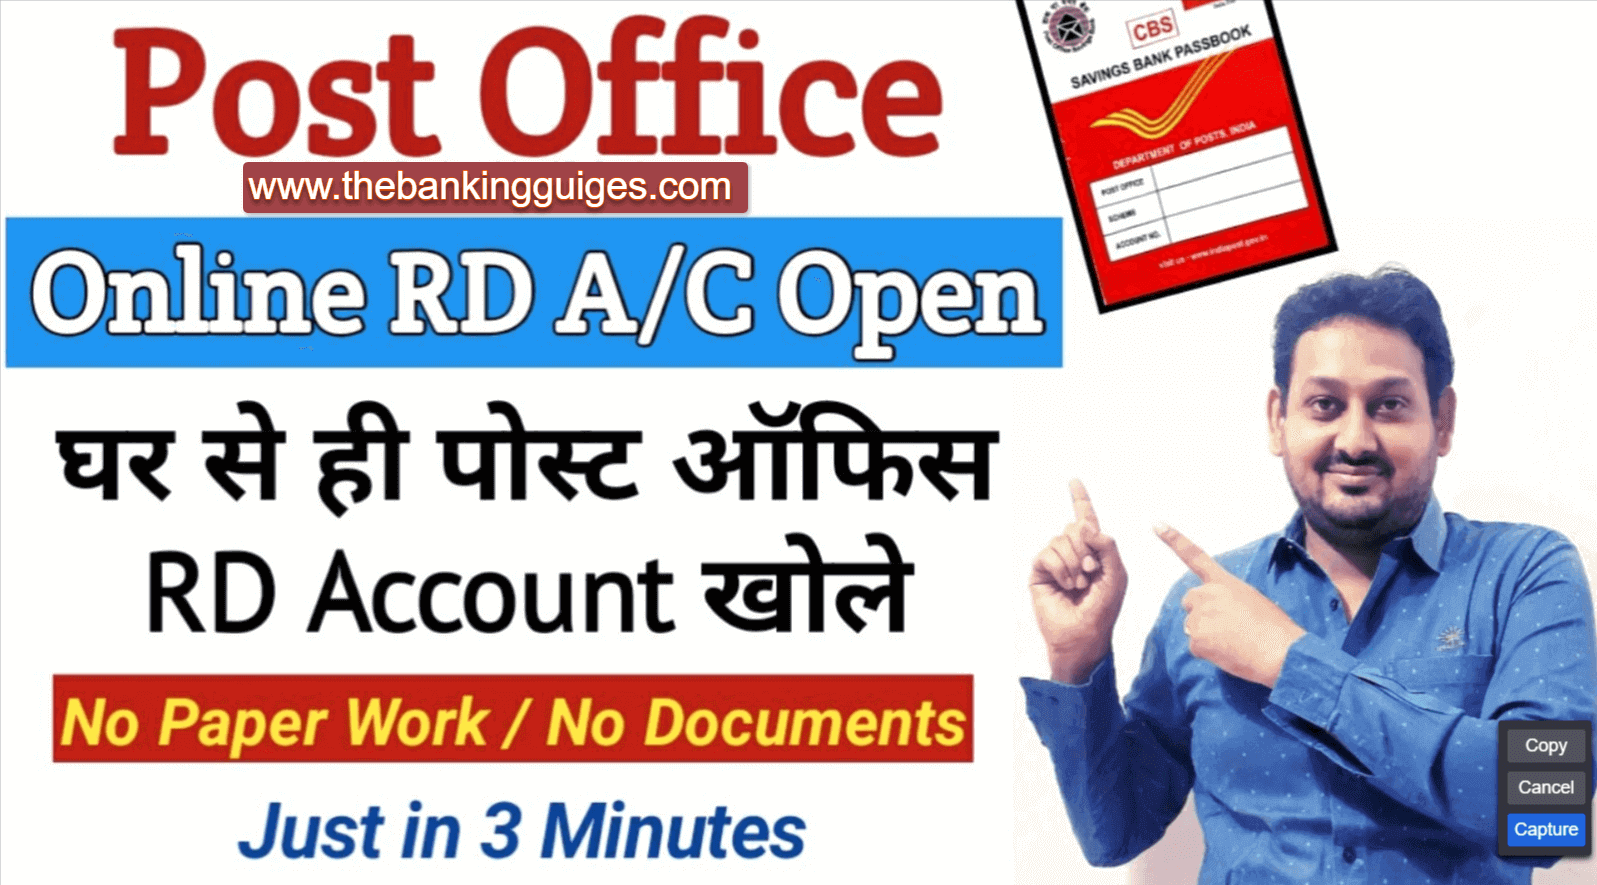 How to Open a Post Office Savings Account Online